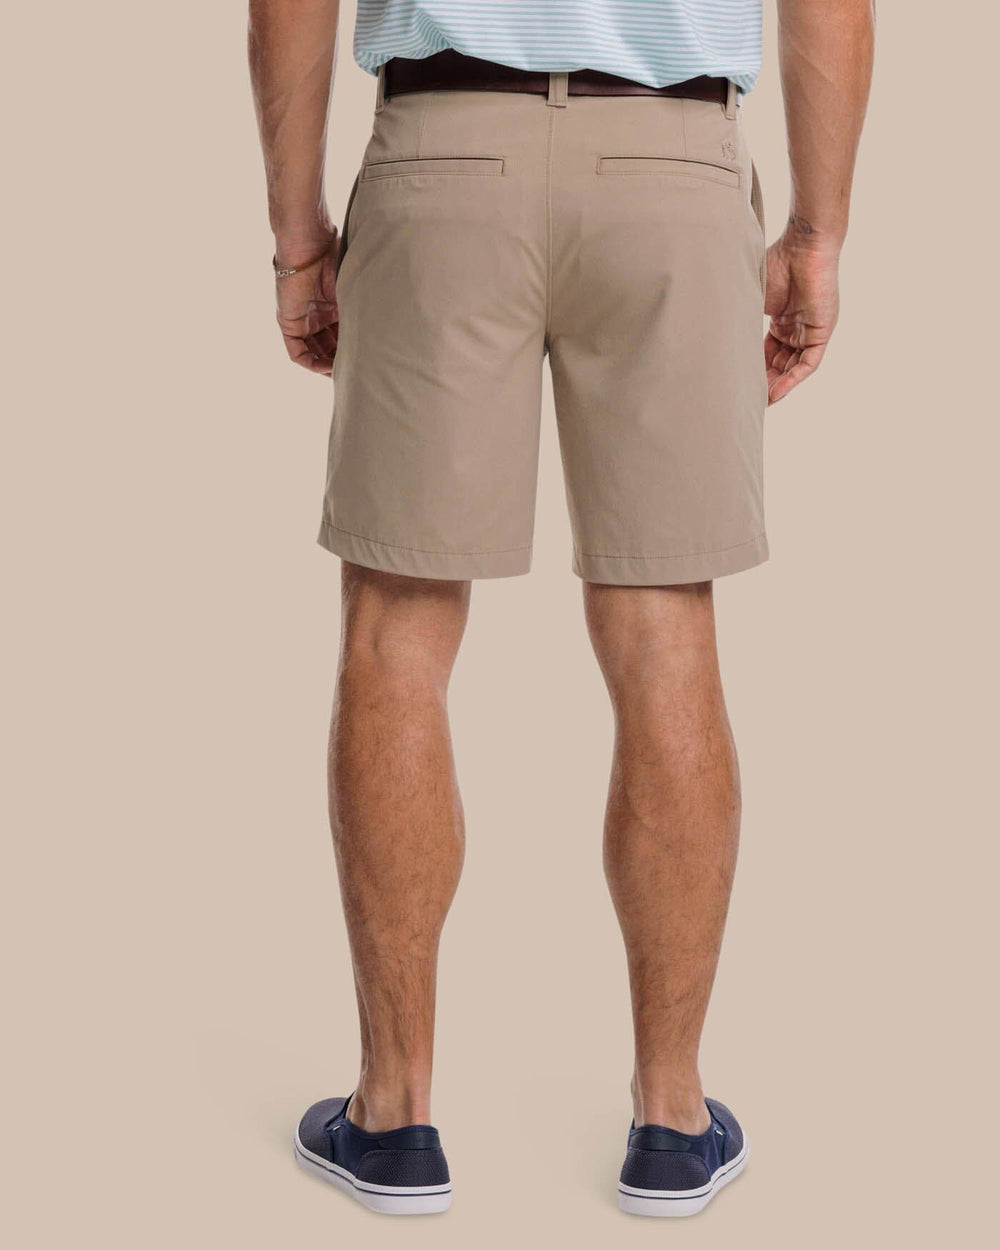 The back view of the Southern Tide brrr die performance short 1 by Southern Tide - Sandstone Khaki